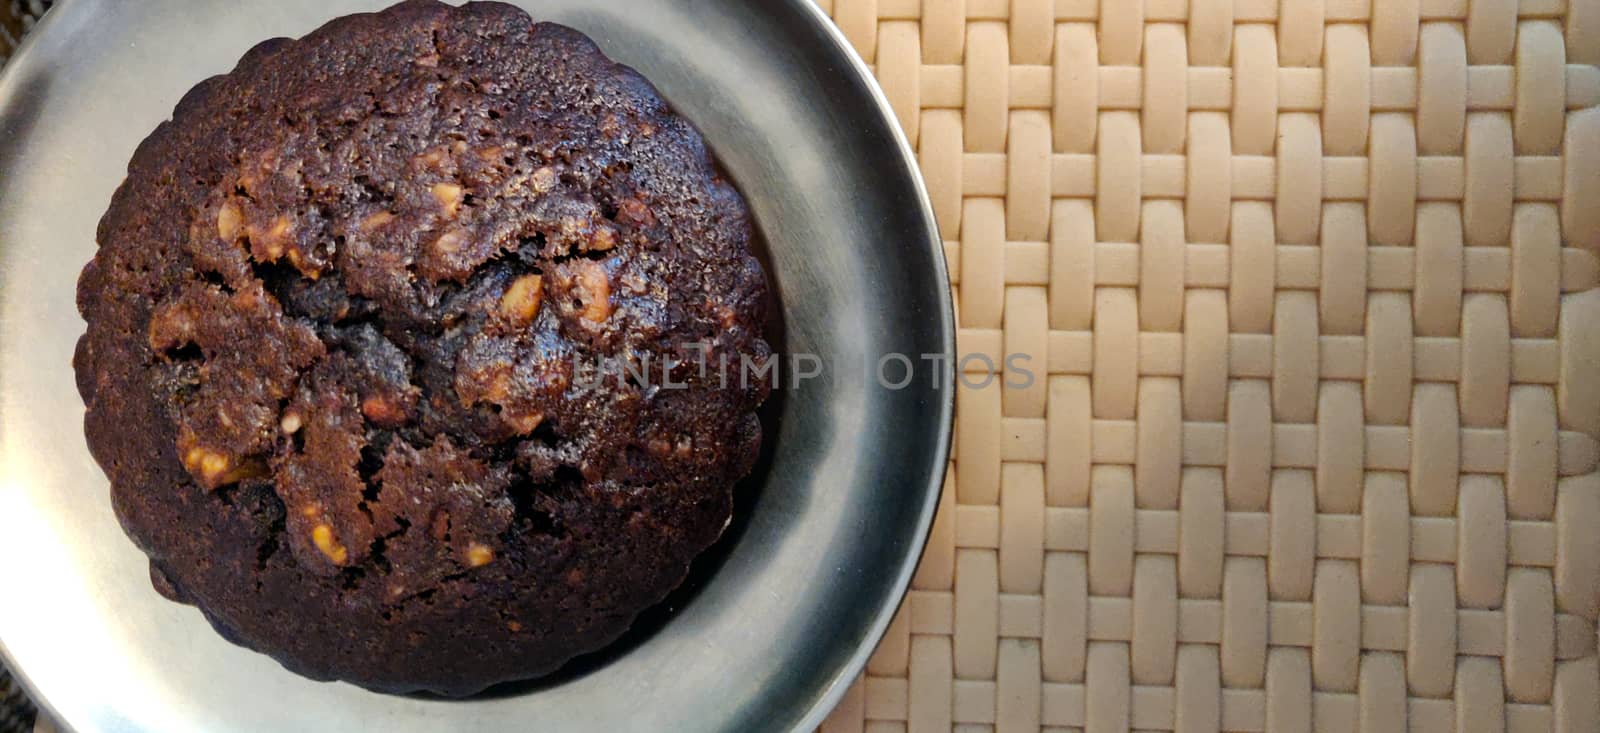 A close up of hot chocolate walnut muffin on a steel plate on a weave pattern table